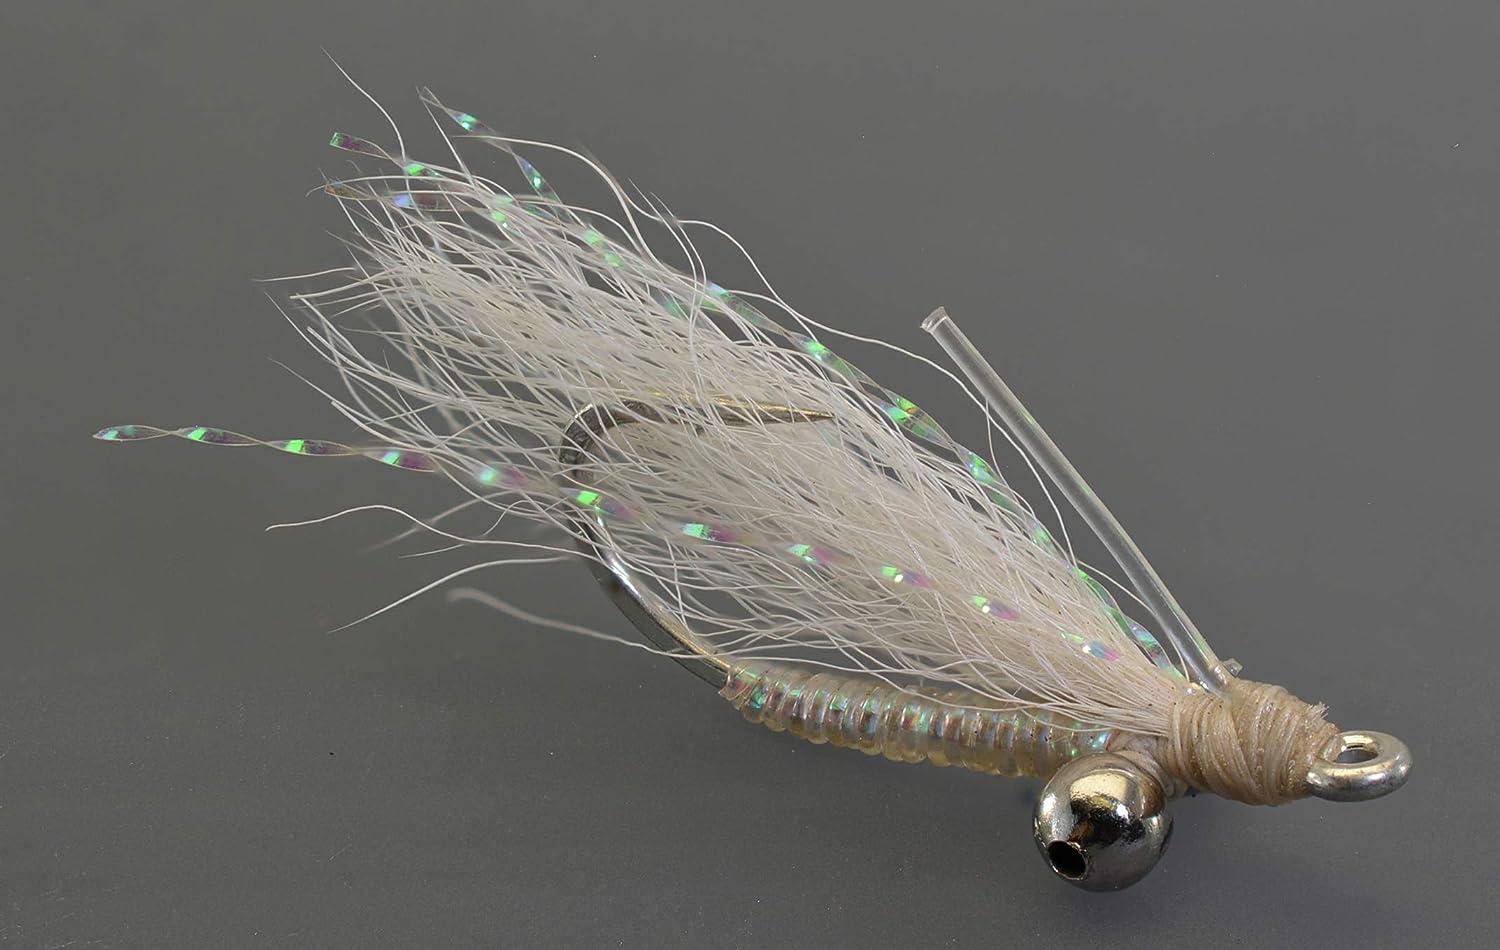 Crazy Charlie Saltwater Fly Fishing Flies - Choose from White, Pink,  Crystal, Tan & Chartreuse - Hand Tied on Mustad Signature Duratin Fly Hooks  Sizes #2, #4 & #6 20ct 5 Color